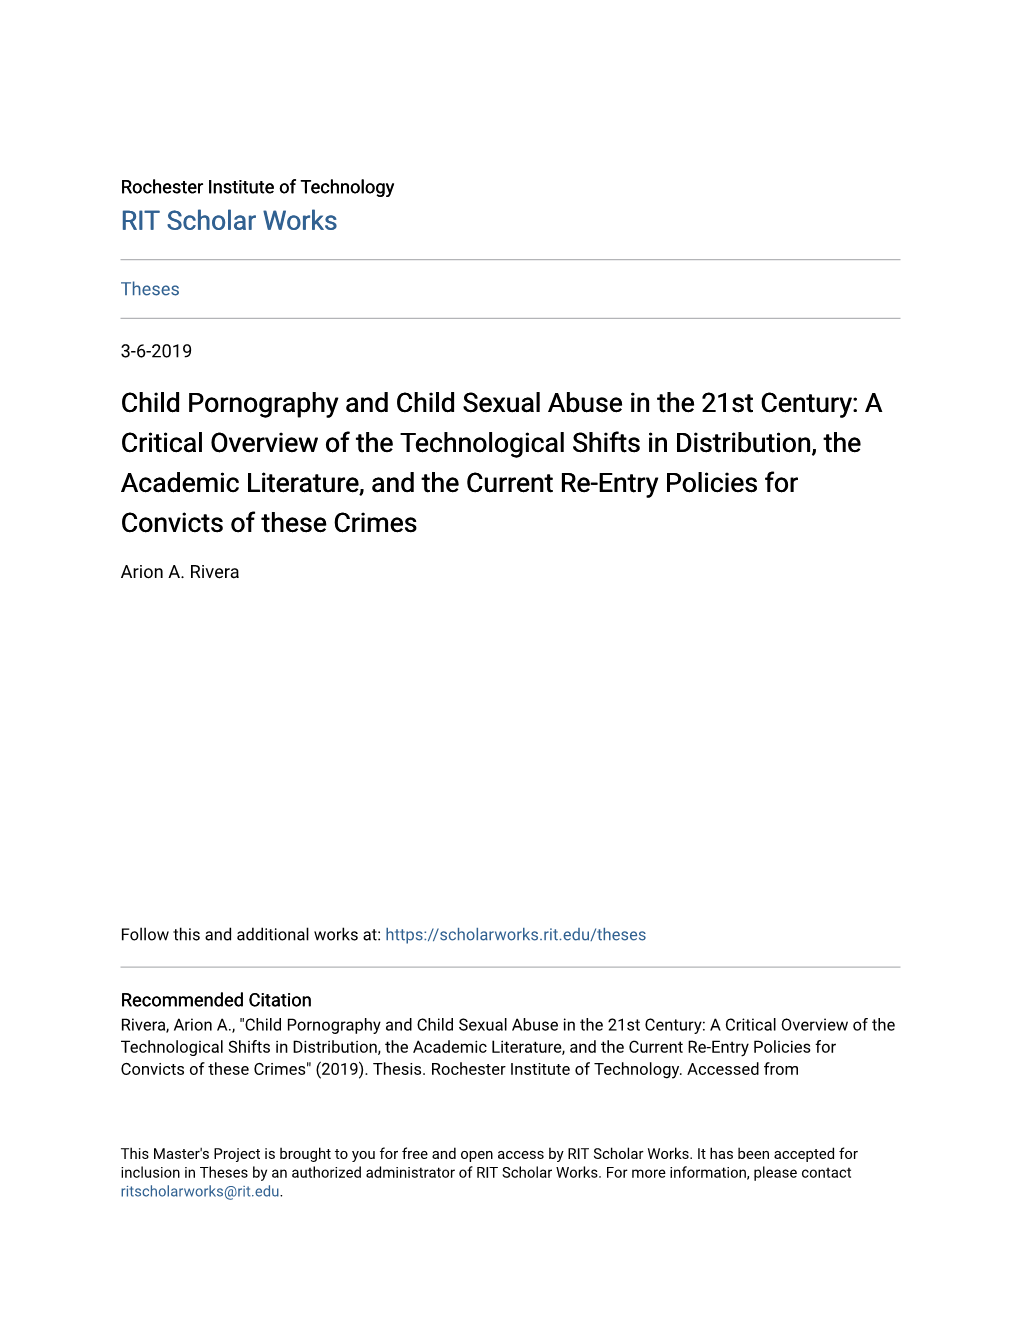 Child Pornography and Child Sexual Abuse in the 21St Century